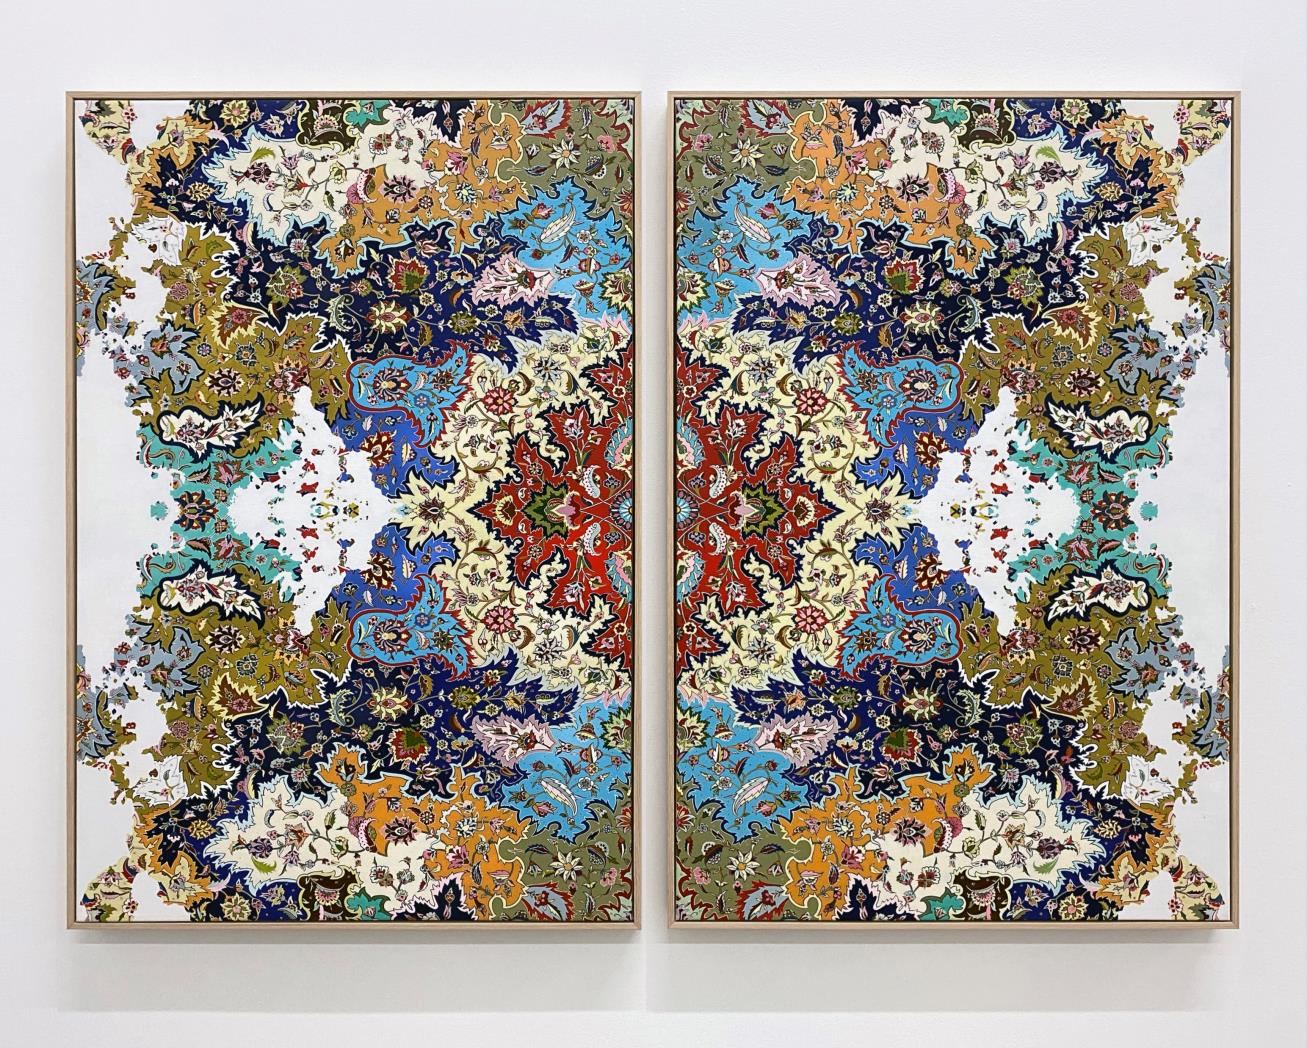 Jason Seife, Circle Takes the Square , 2020 , Oil and acrylic on canvas , 96.5 x 66 cm each, 96.5 x 142 cm total , courtesy the artist and Unit London